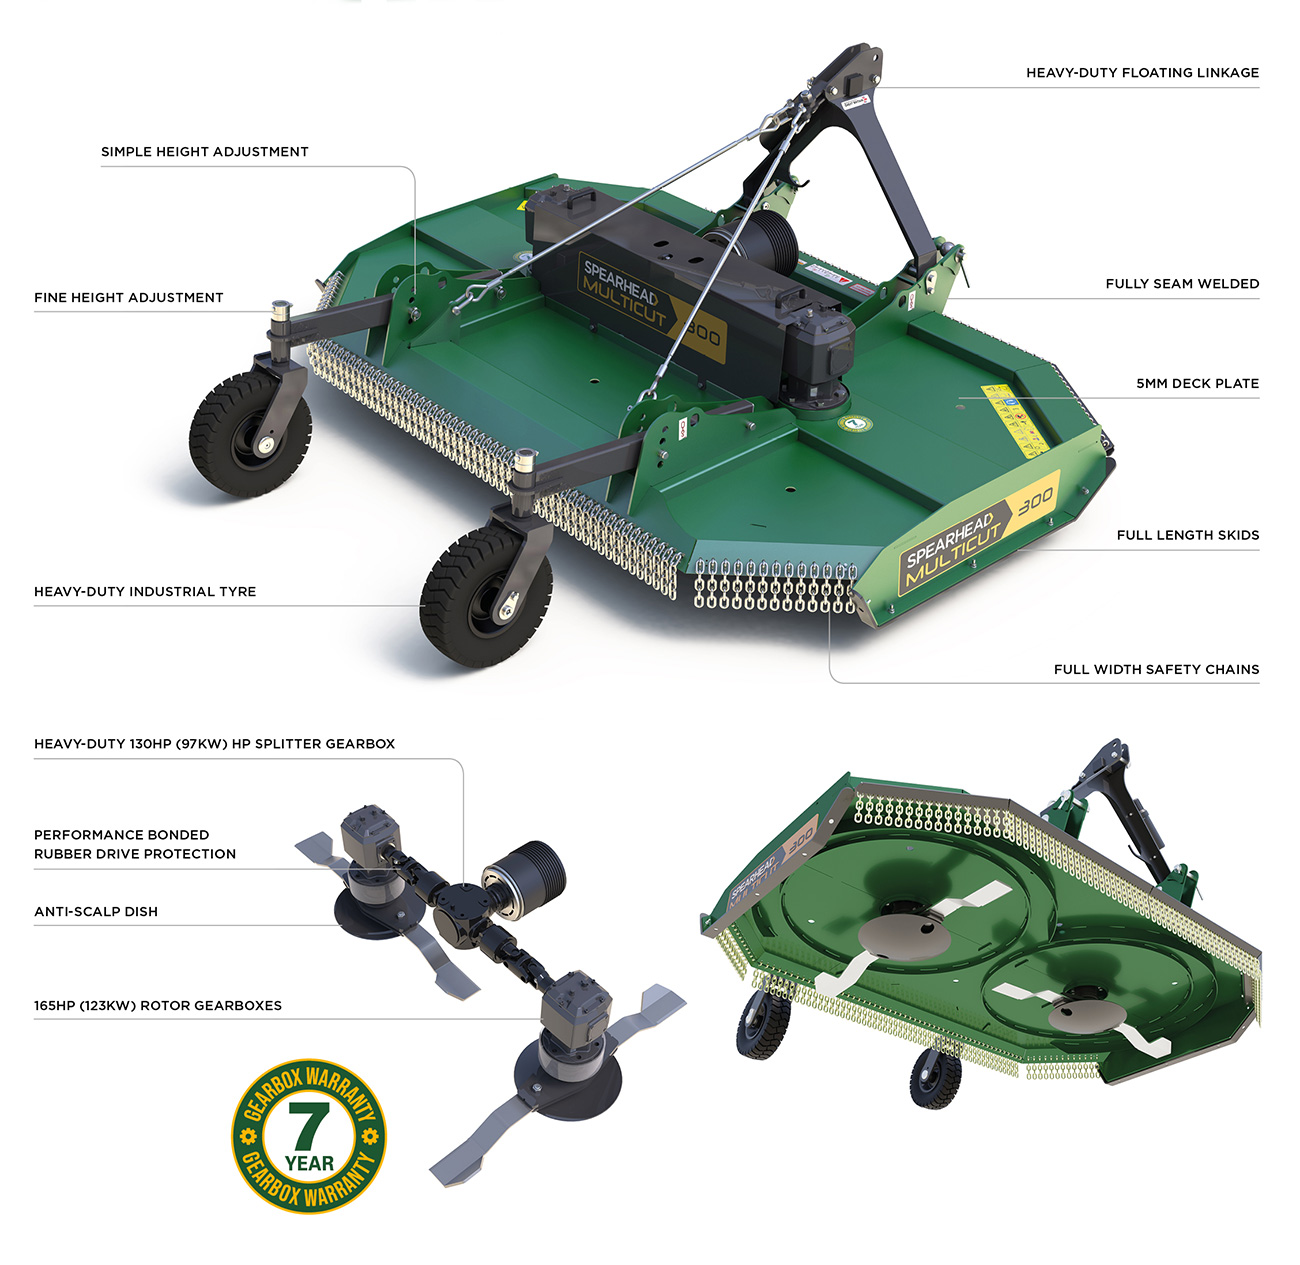 Multicut 300 Rotary Mower features